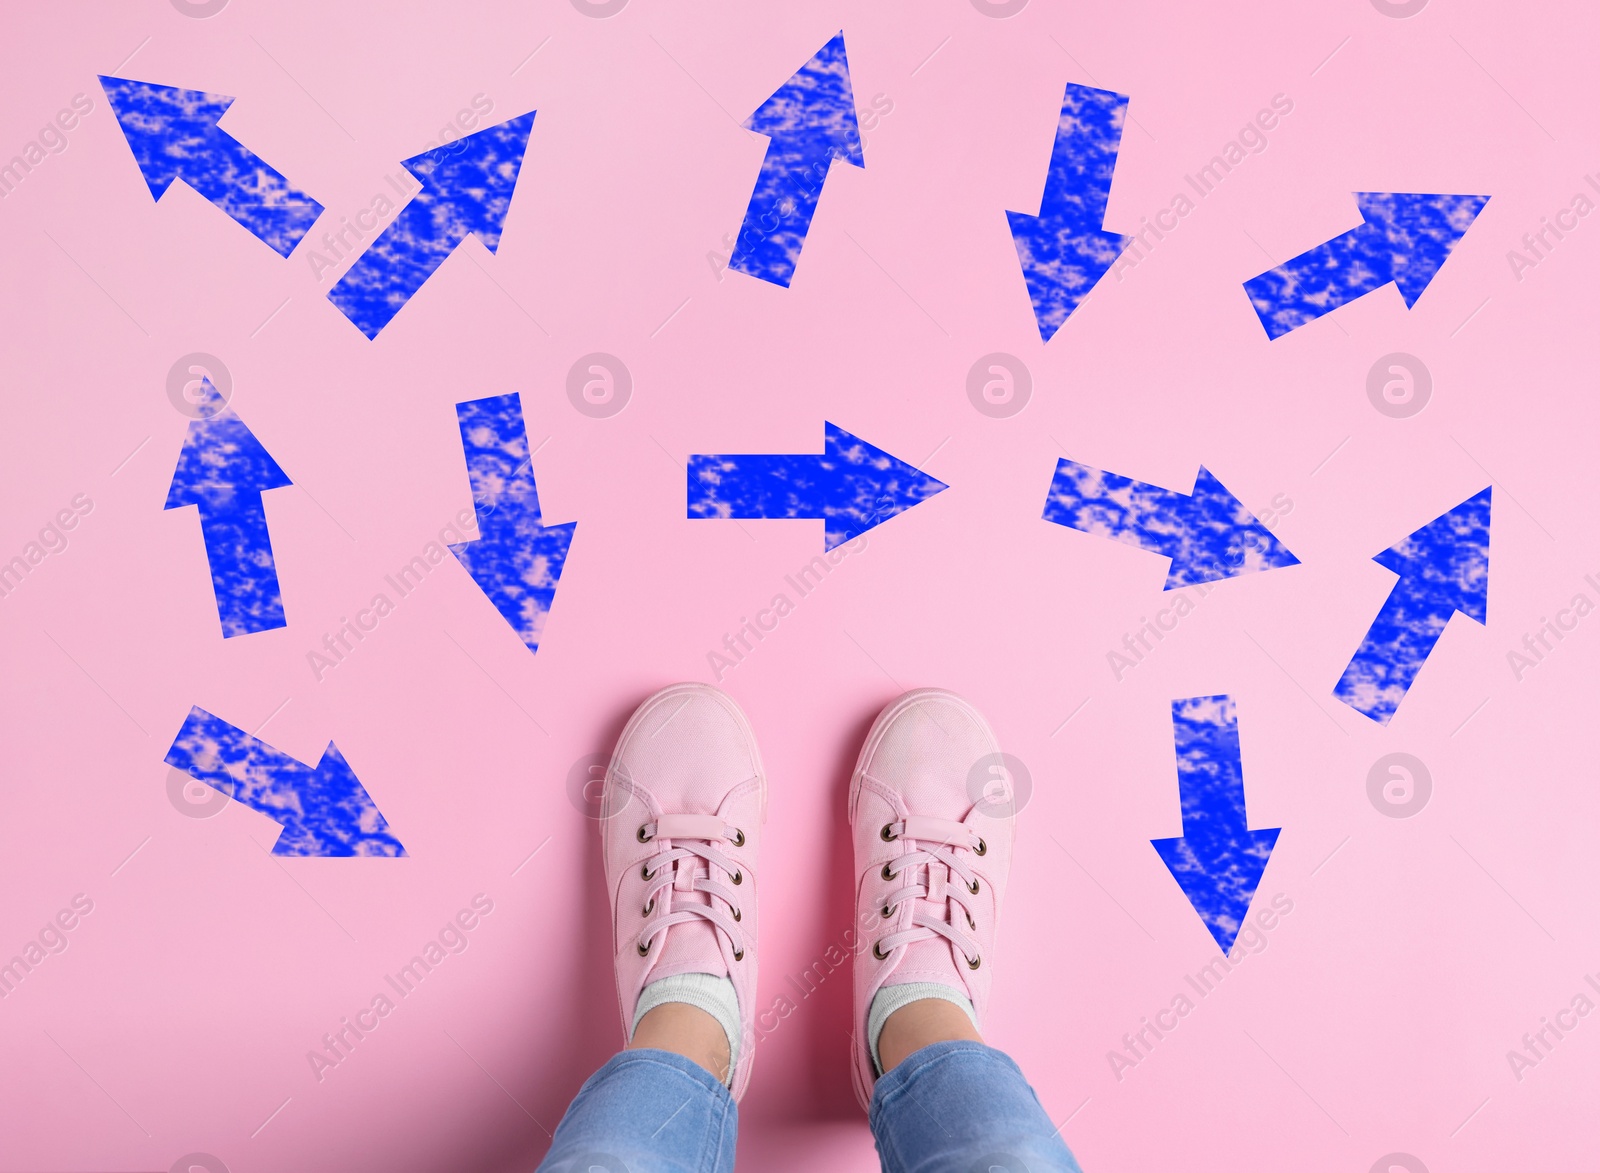 Image of Choosing future profession. Girl standing in front of drawn signs on pink background, top view. Arrows pointing in different directions symbolizing diversity of opportunities